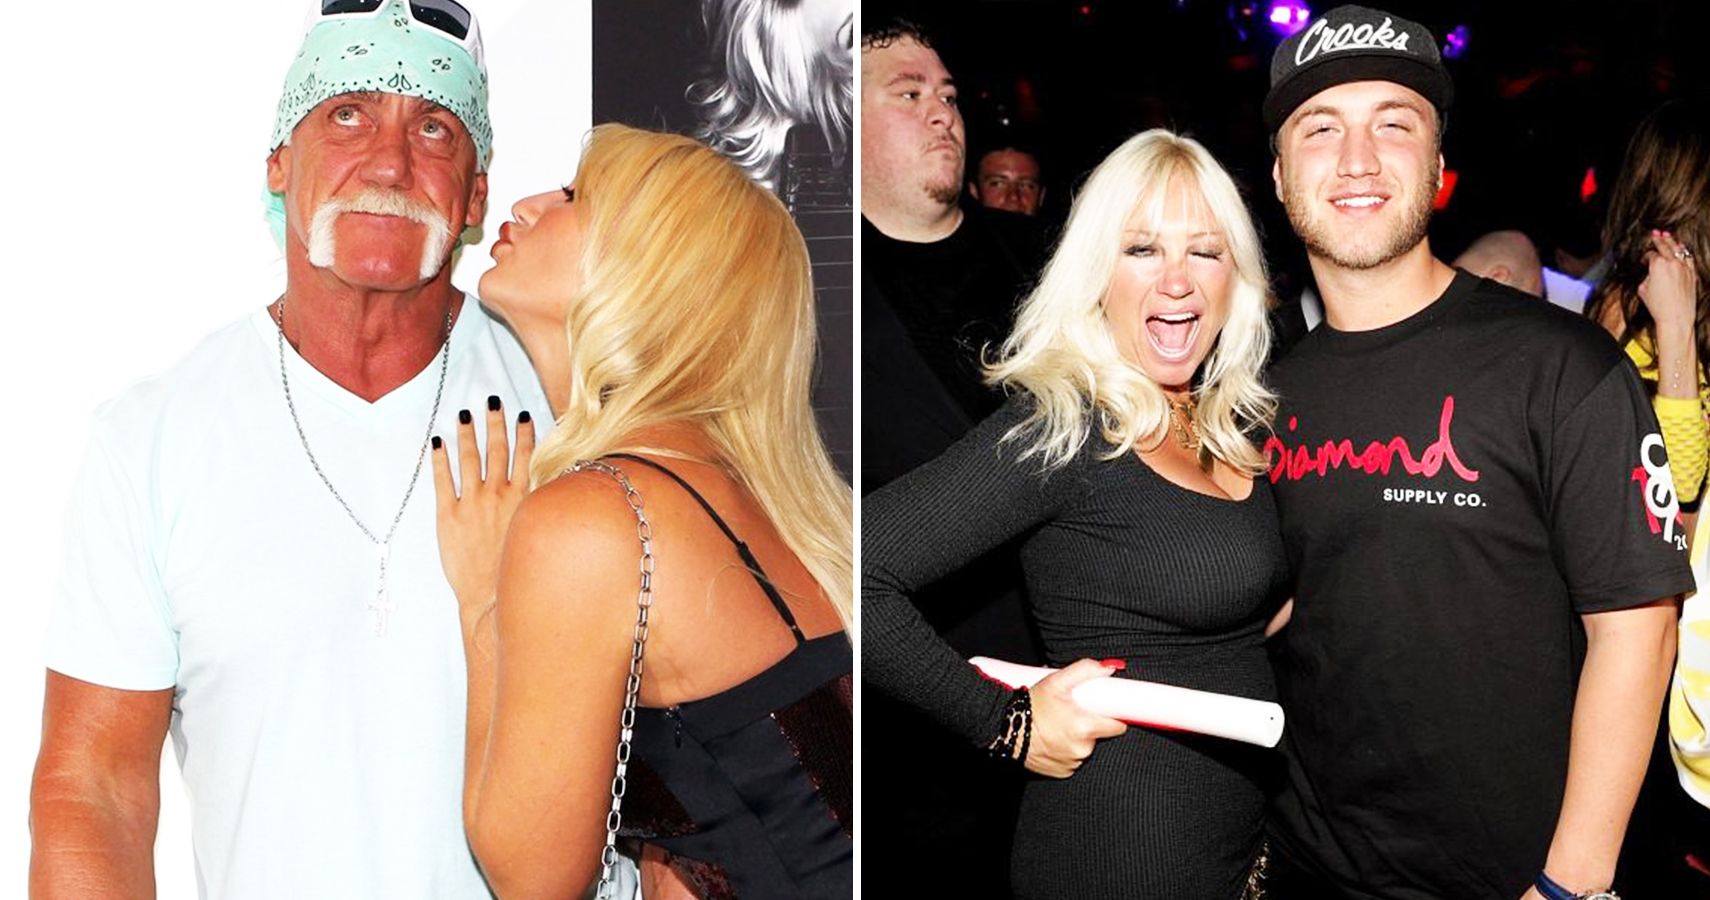 Things About Hulk Hogan's Family That He May Want Forgotten